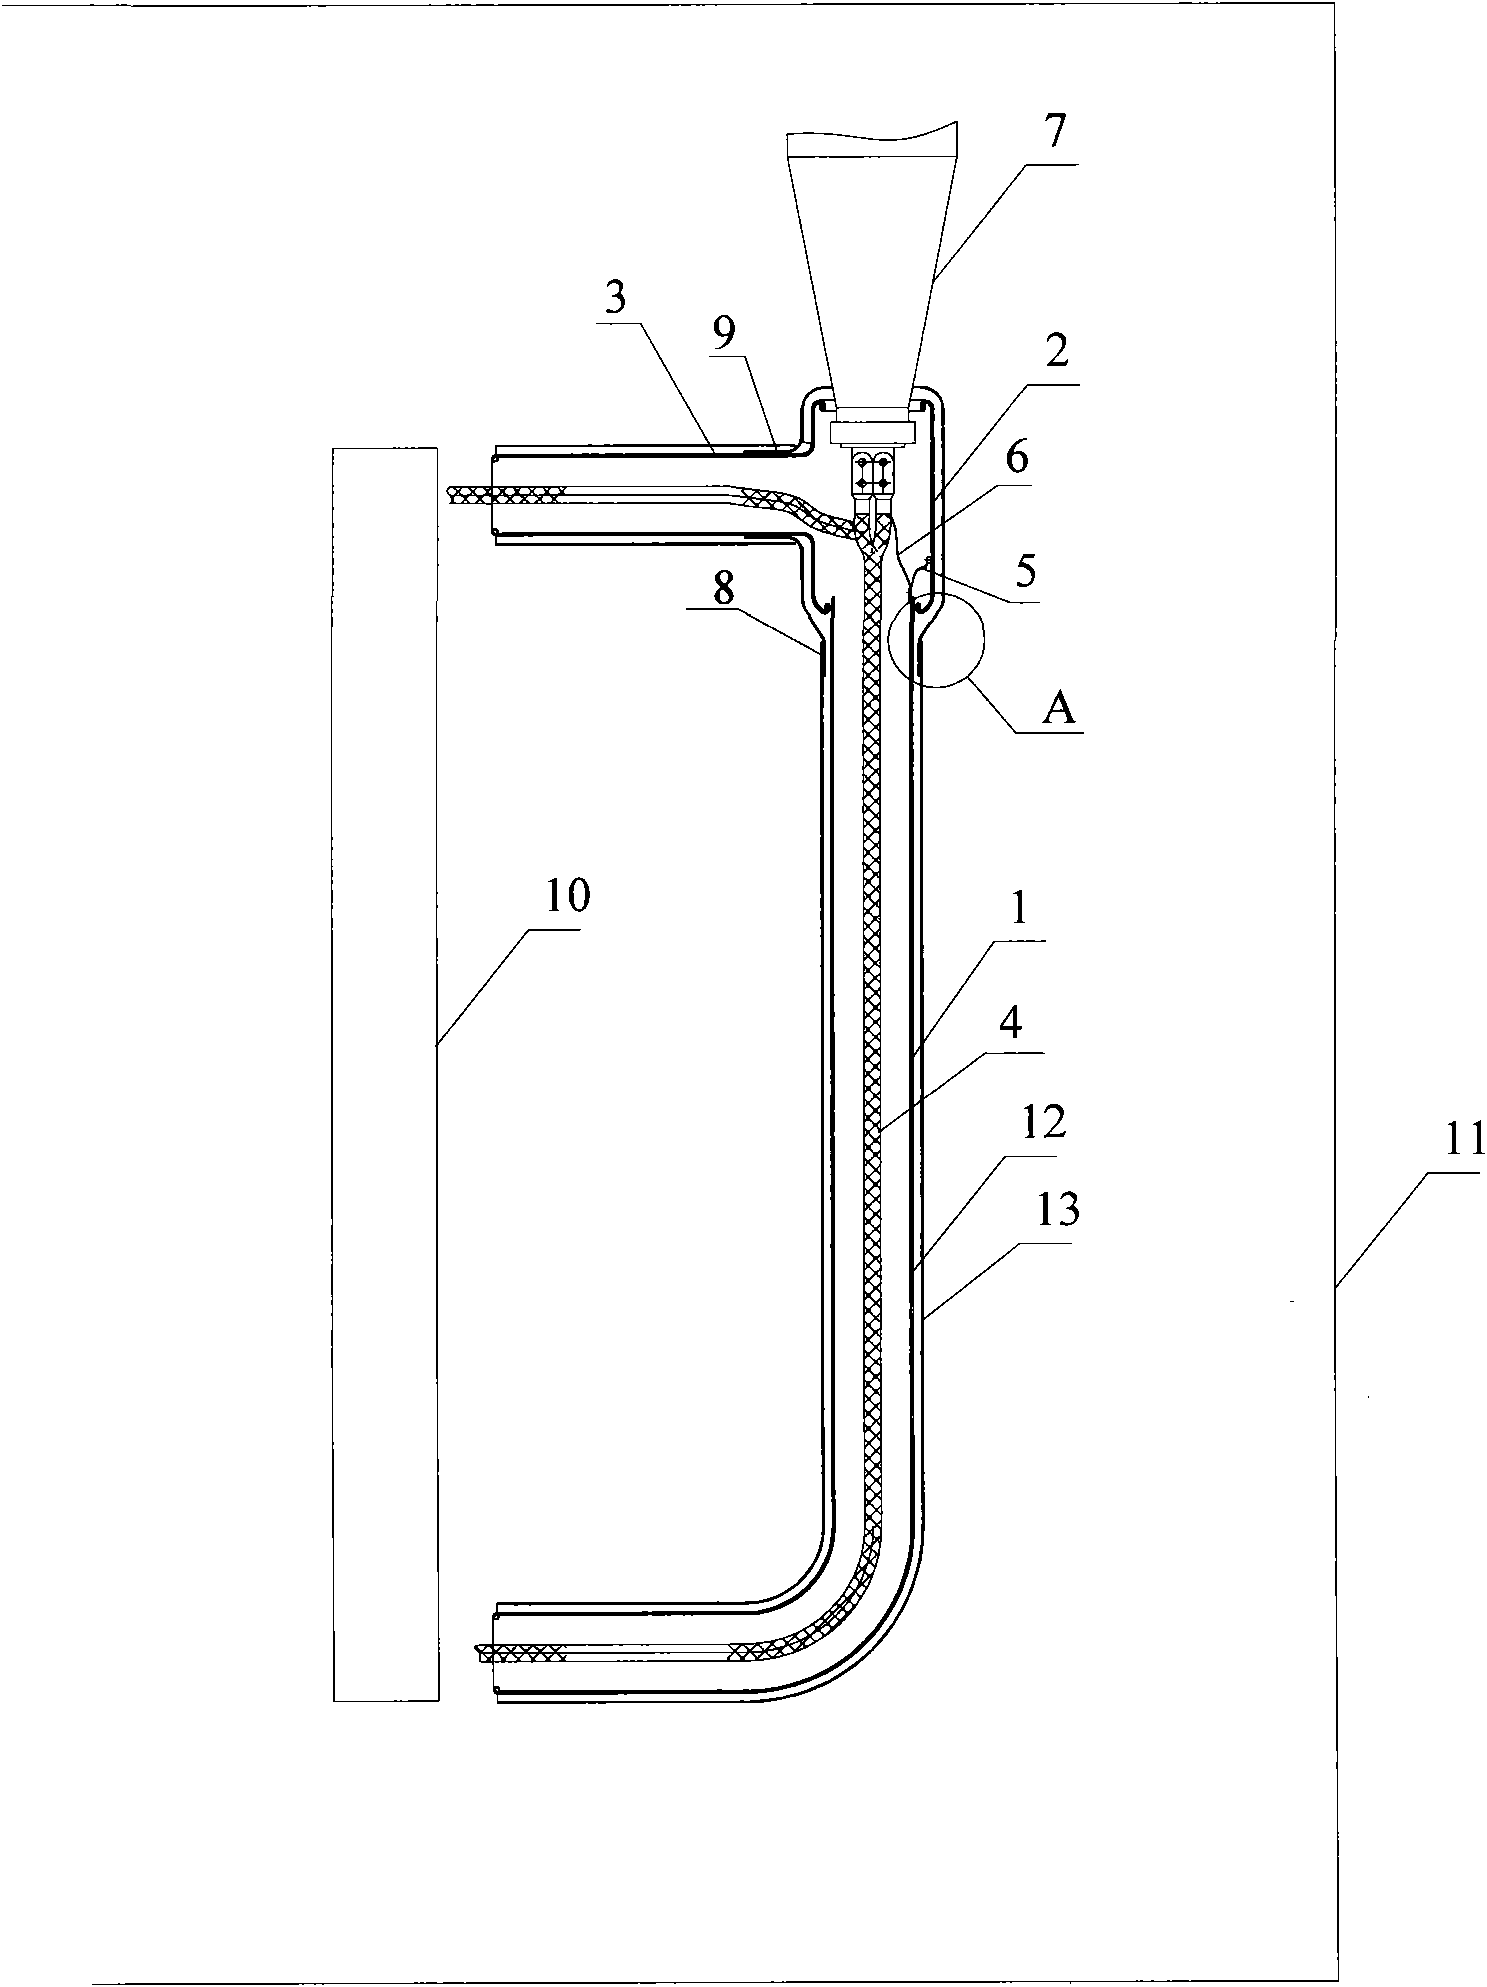 Extra-high voltage transformer lead shielding device